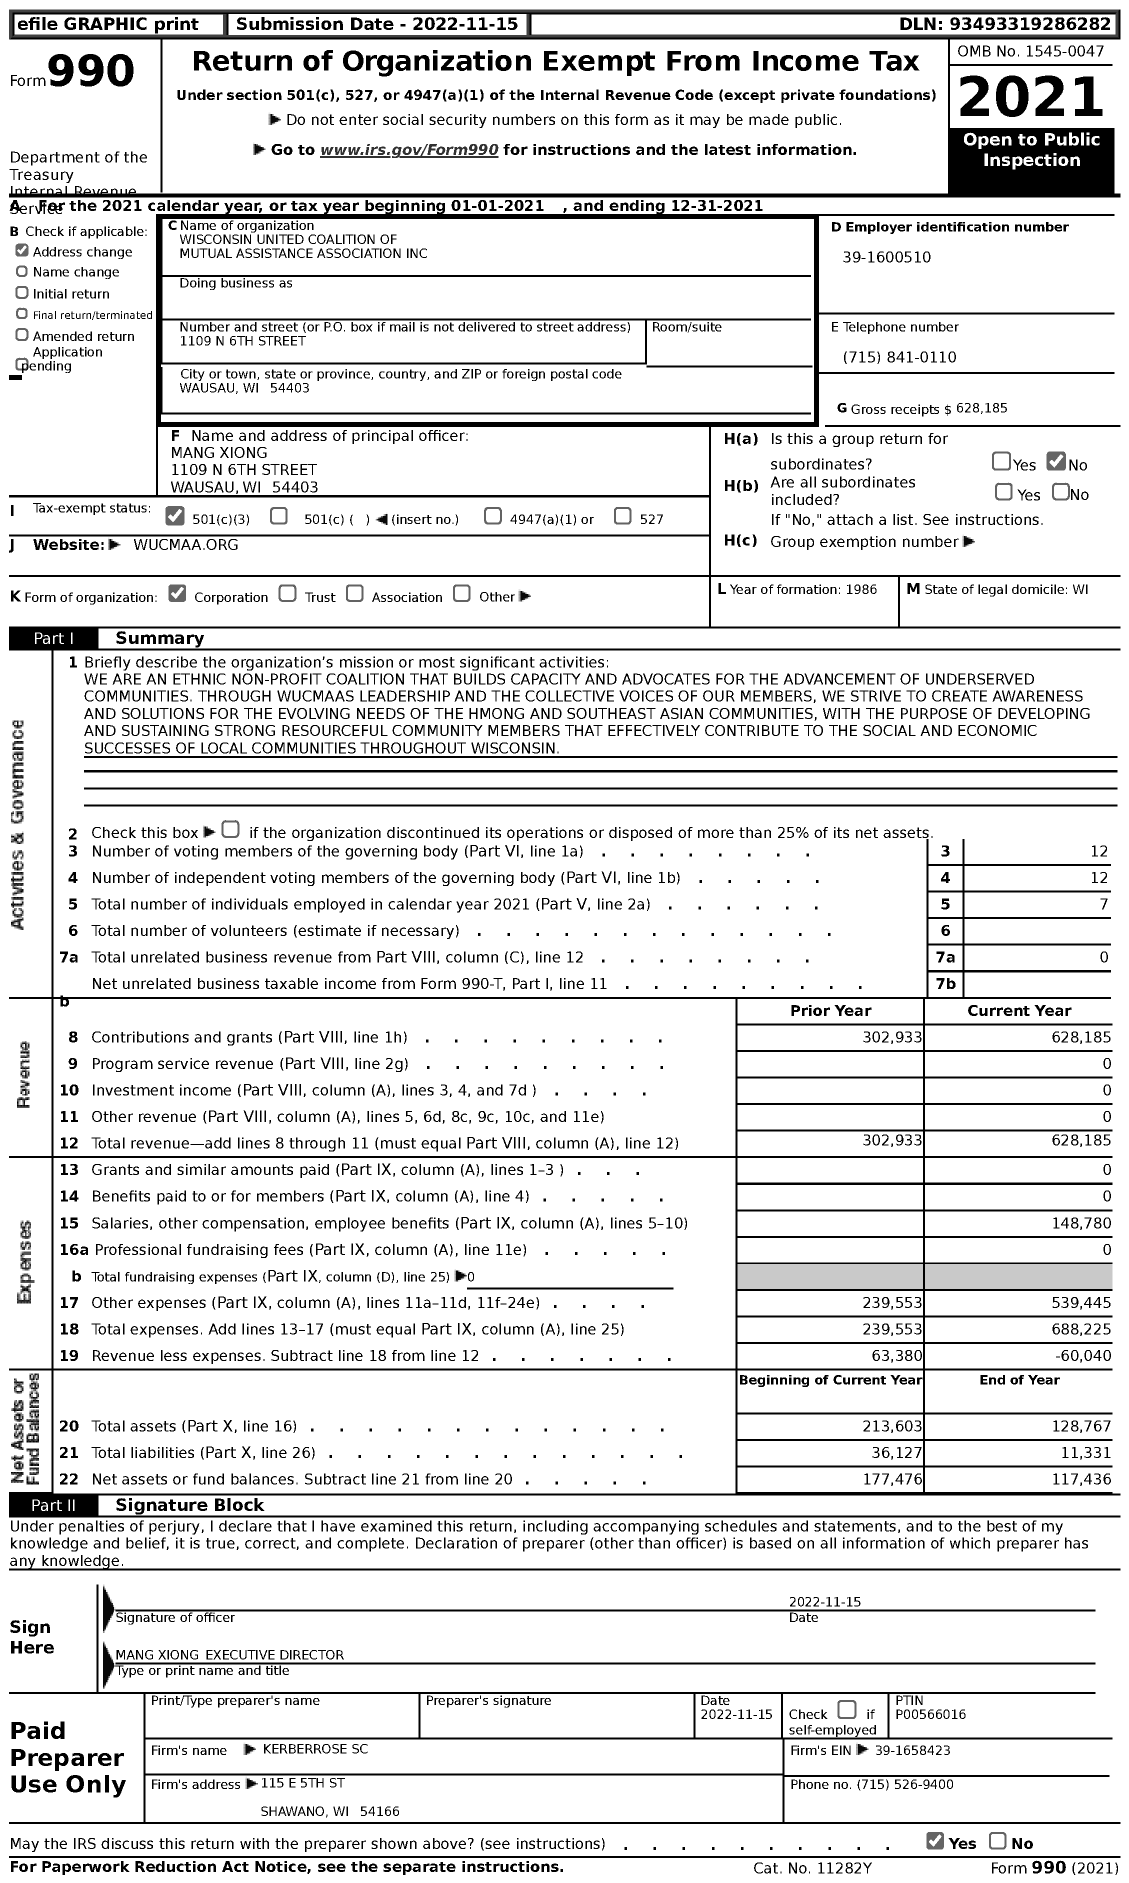 Image of first page of 2021 Form 990 for Wisconsin United Coalition of Mutual Assistance Association